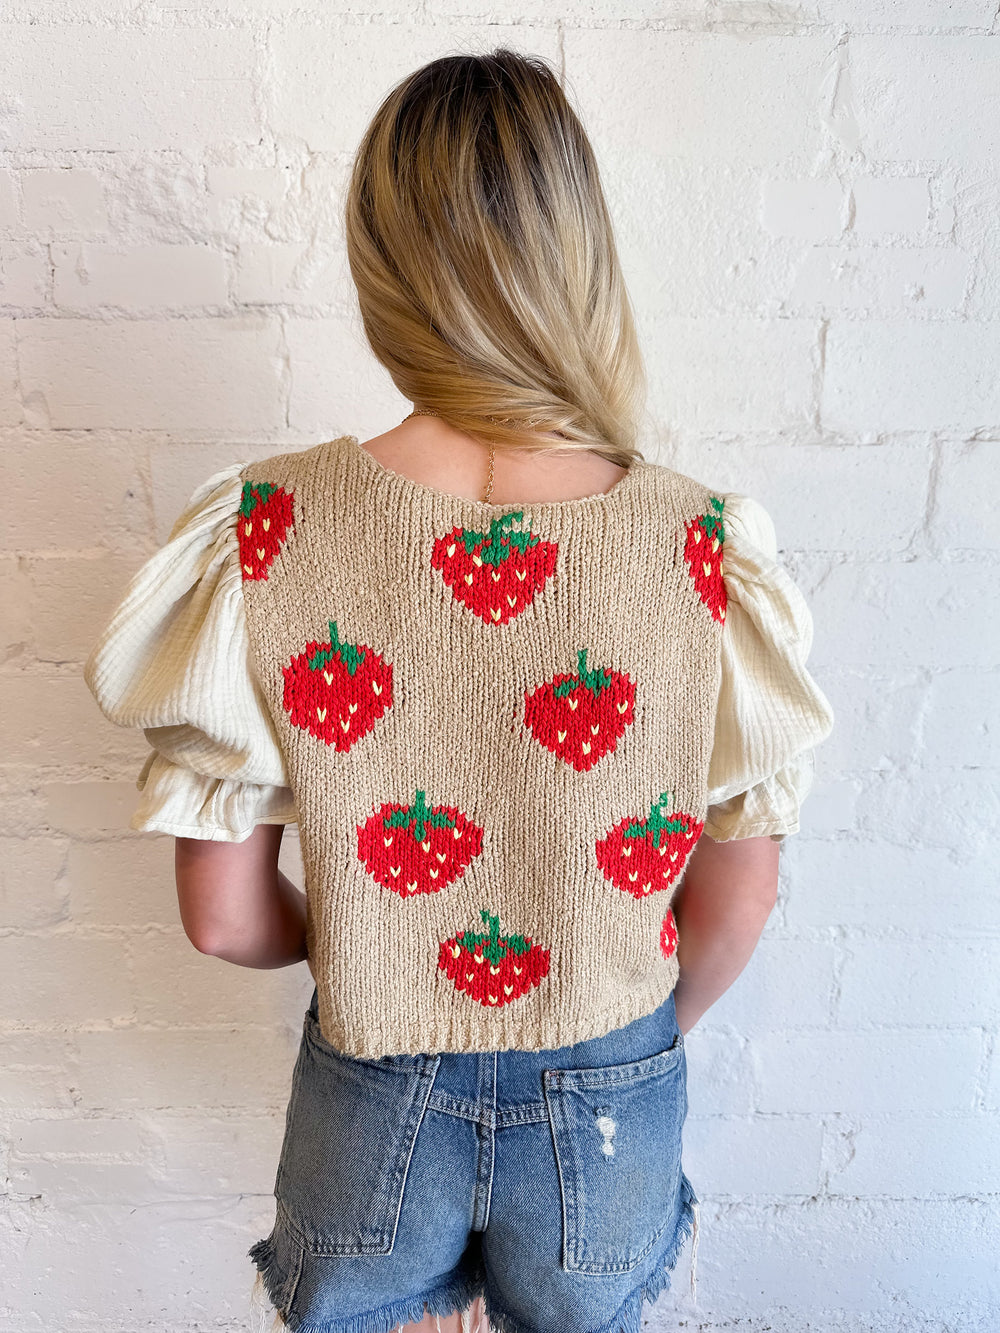 Free People Strawberry Jam Mixed Media Cropped Sweater, Tops, Free People, Adeline, dallas boutique, dallas texas, texas boutique, women's boutique dallas, adeline boutique, dallas boutique, trendy boutique, affordable boutique